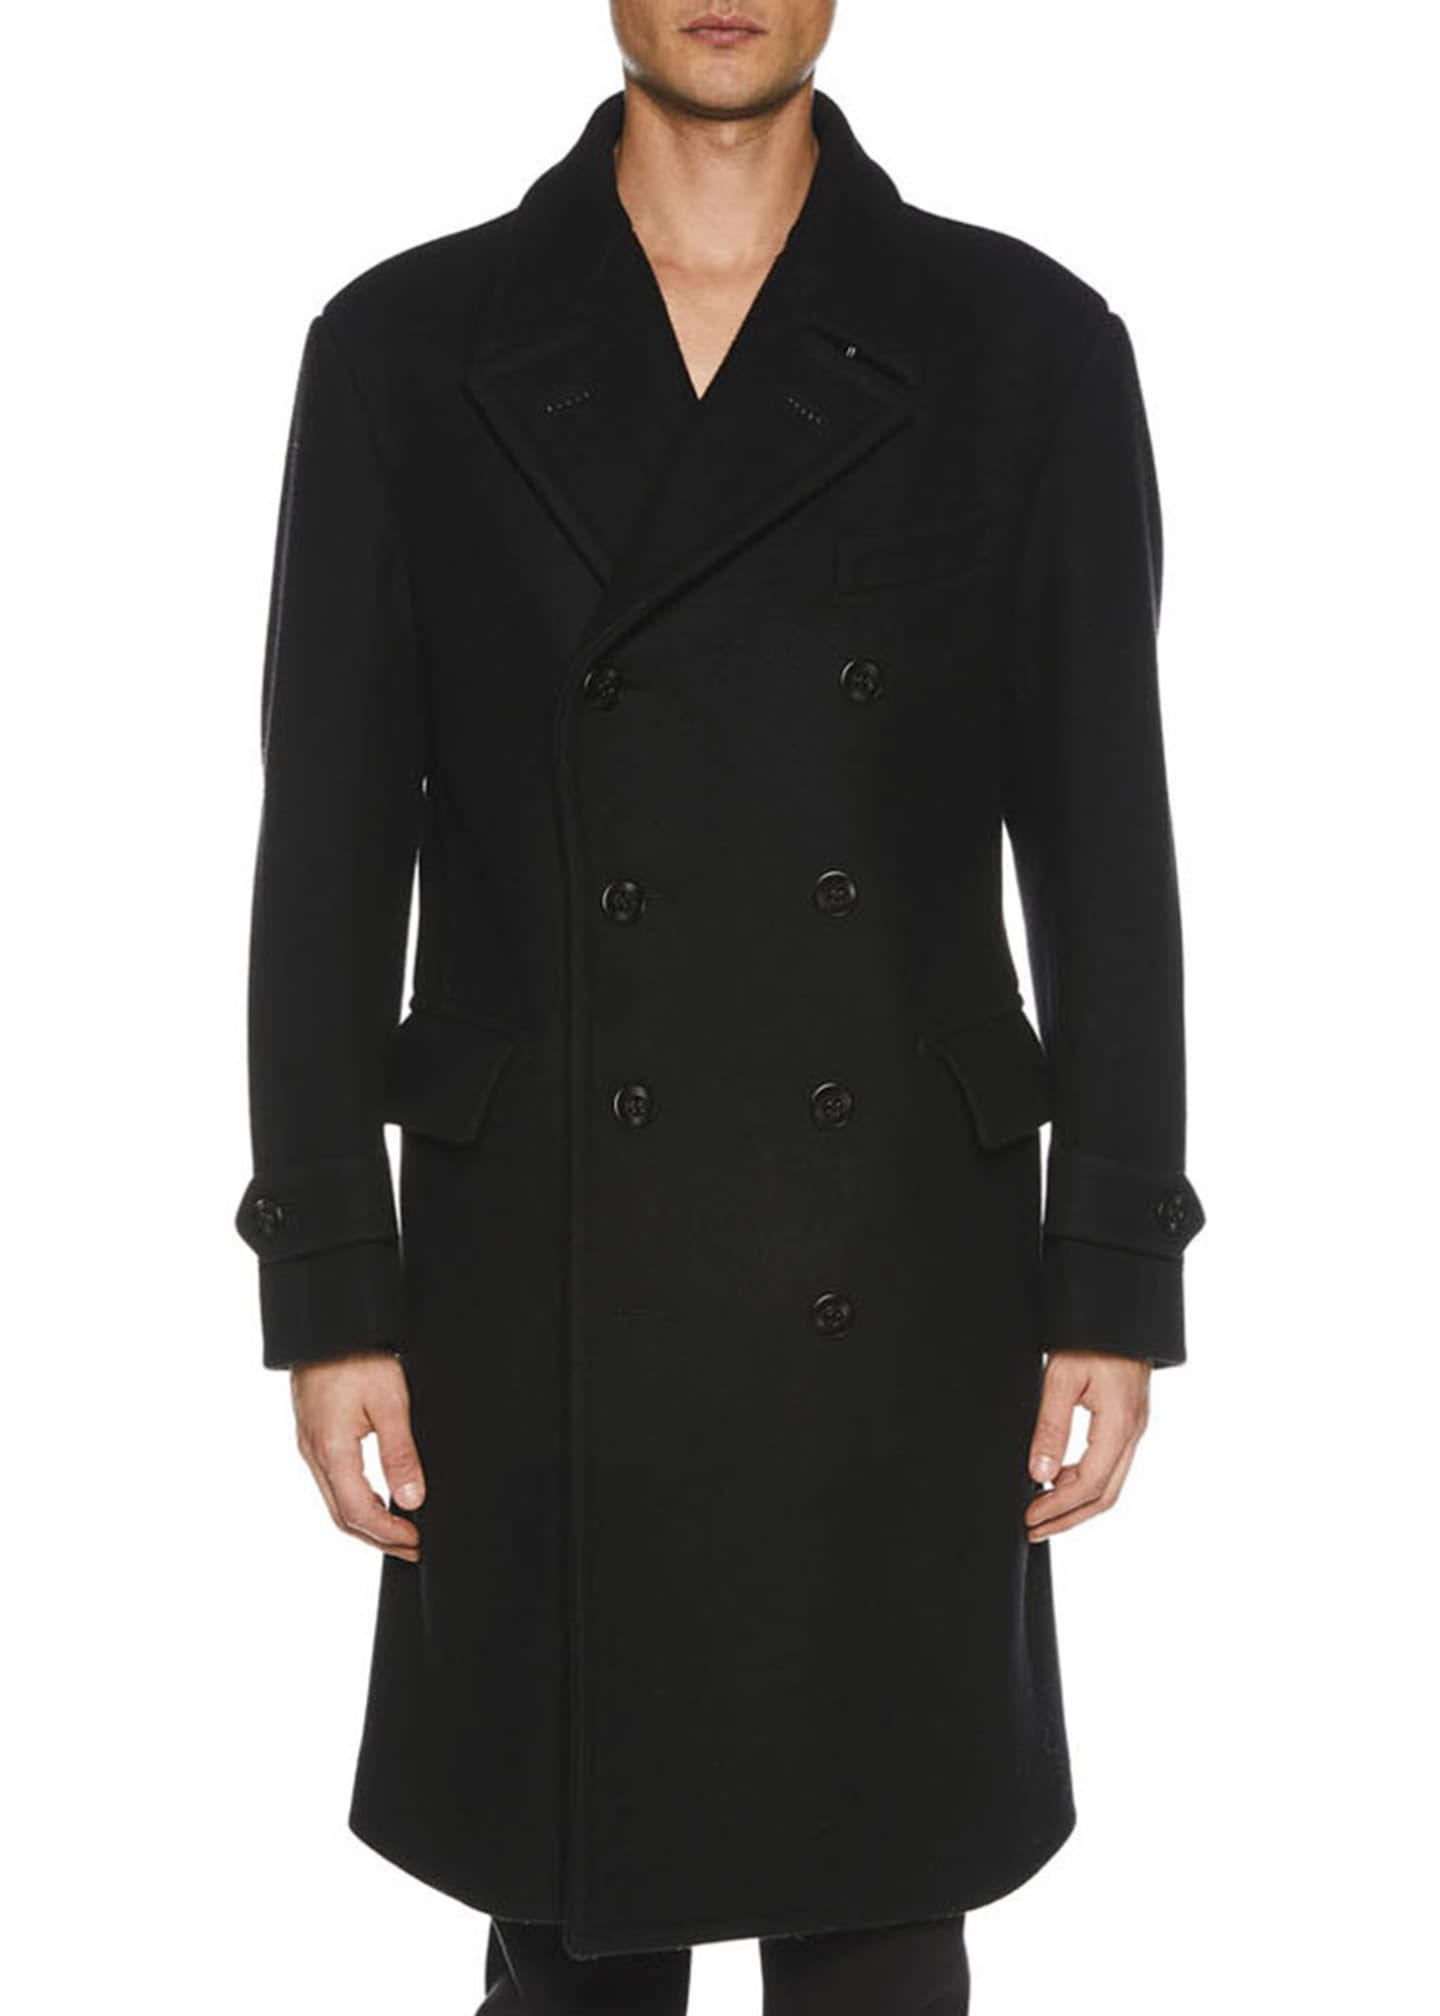 TOM FORD Men's Double-Breasted Trench Coat - Bergdorf Goodman